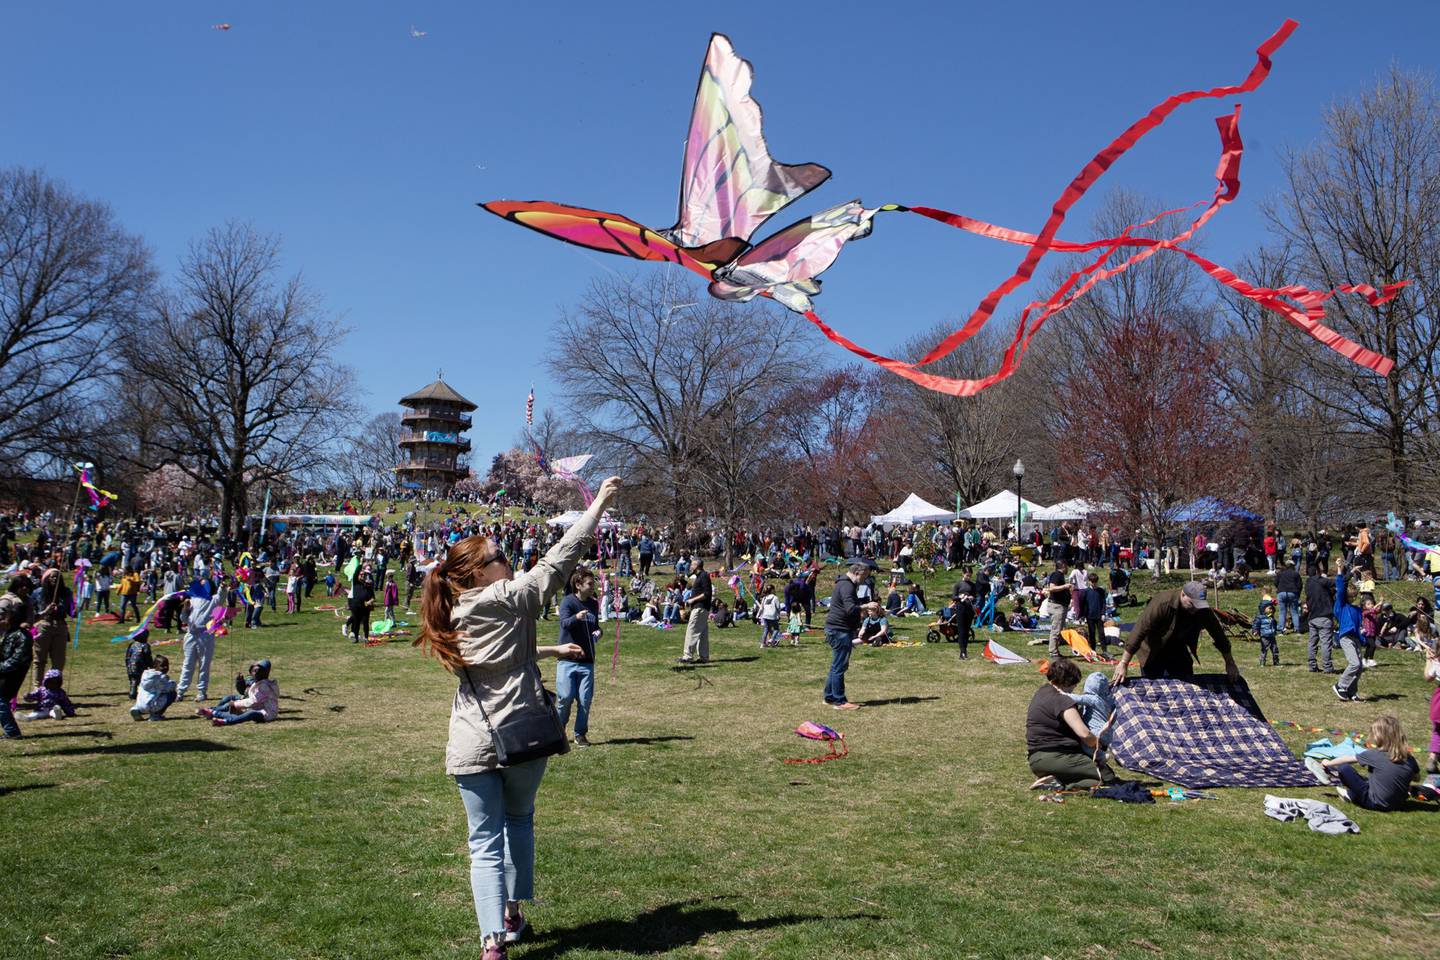 People enjoy a nice day by flying kites at Patterson Park during the Kite Festival on March 26, 2023. (Julia Reihs for The Baltimore Banner)